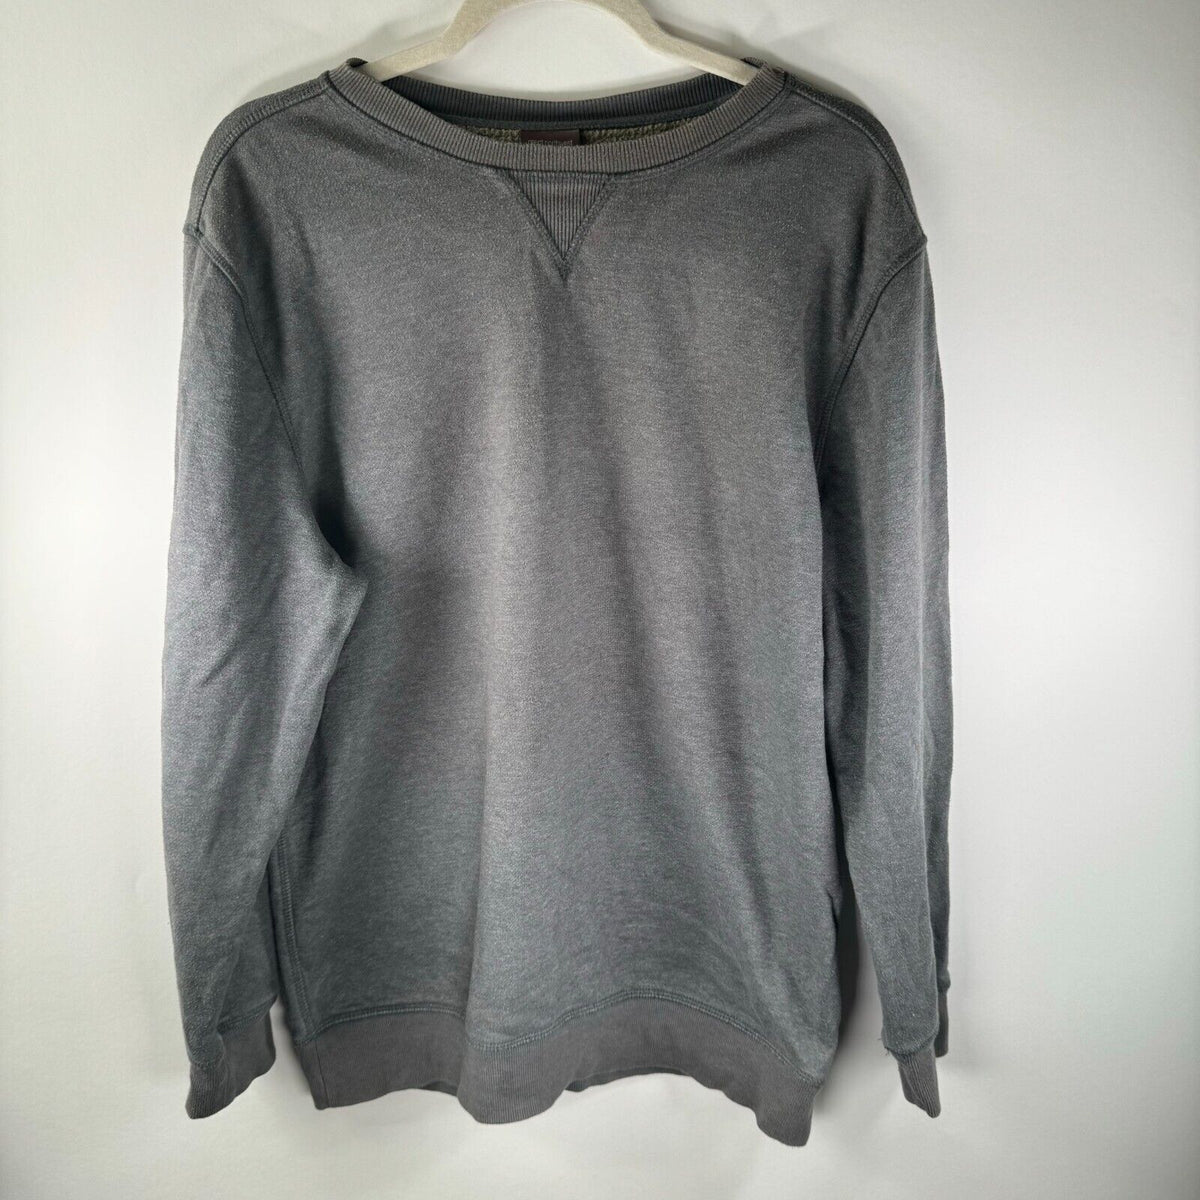 Great Northwest Clothing Company Soft Cotton Pullover Sweater Gray Mens Size M